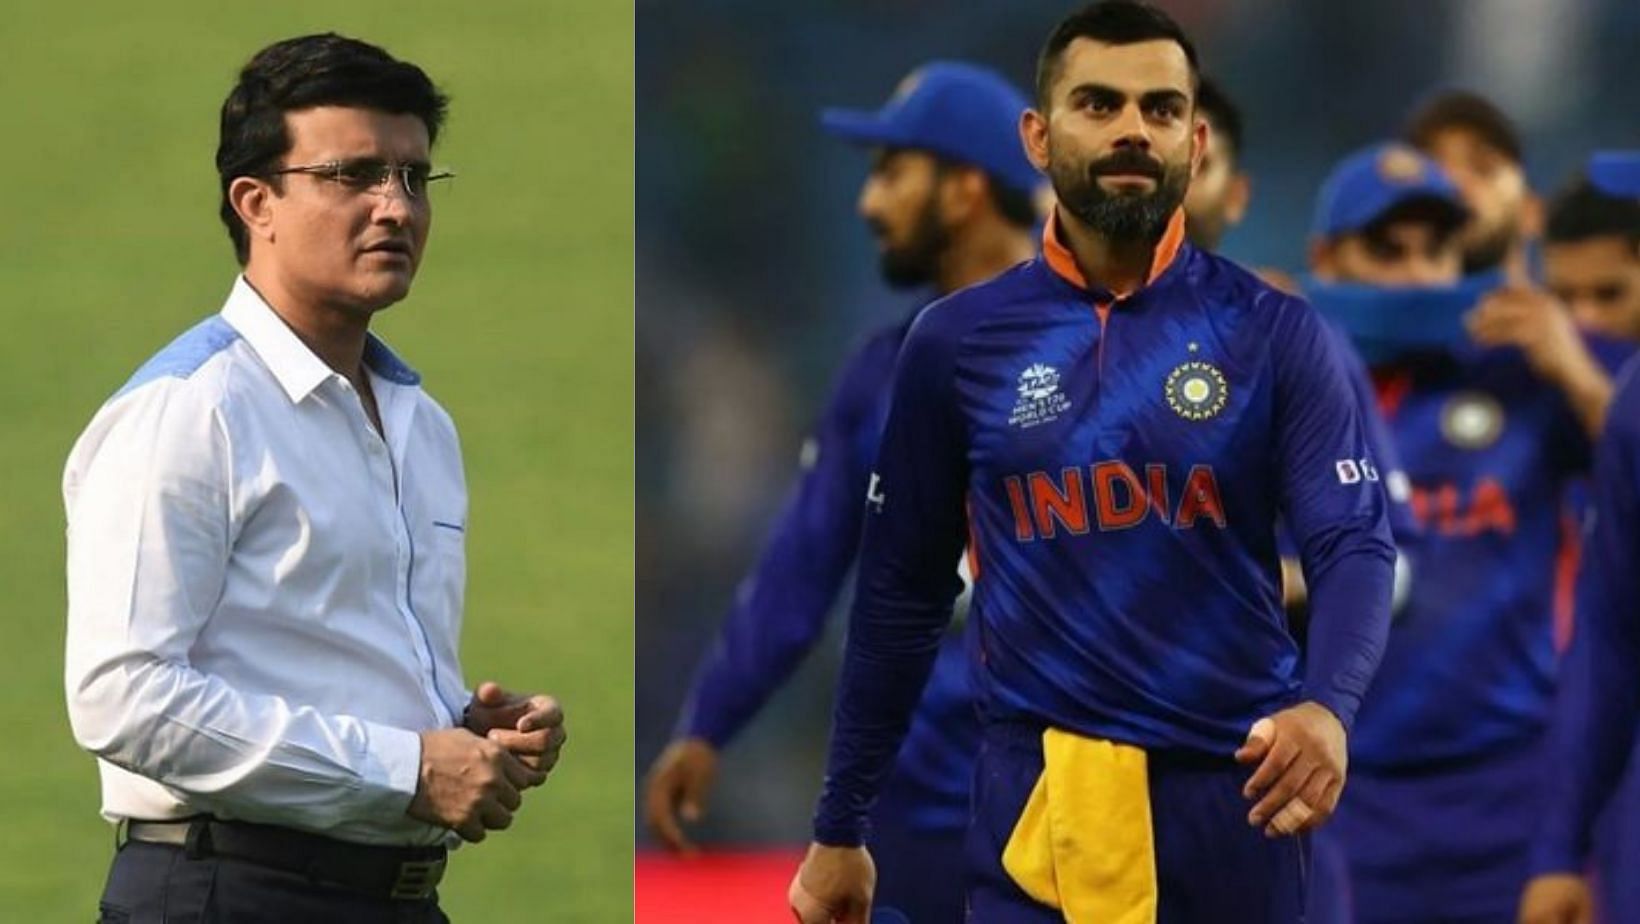 BCCI President Sourav Ganguly Reacts To India’s T20 World Cup 2021 Campaign